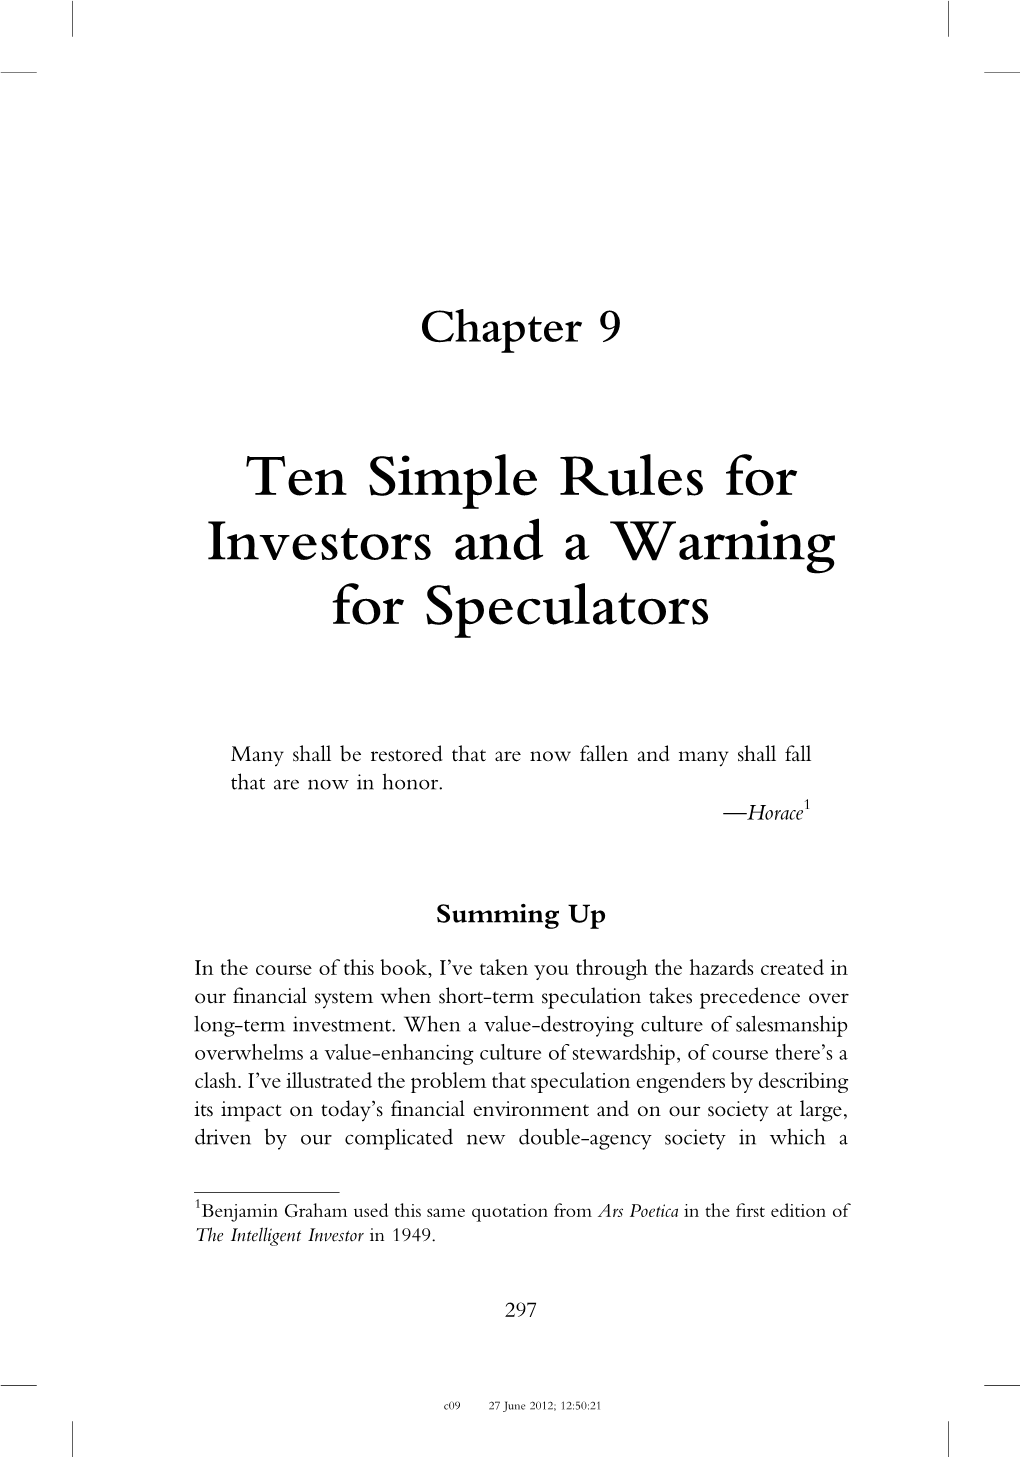 Ten Simple Rules for Investors and a Warning for Speculators